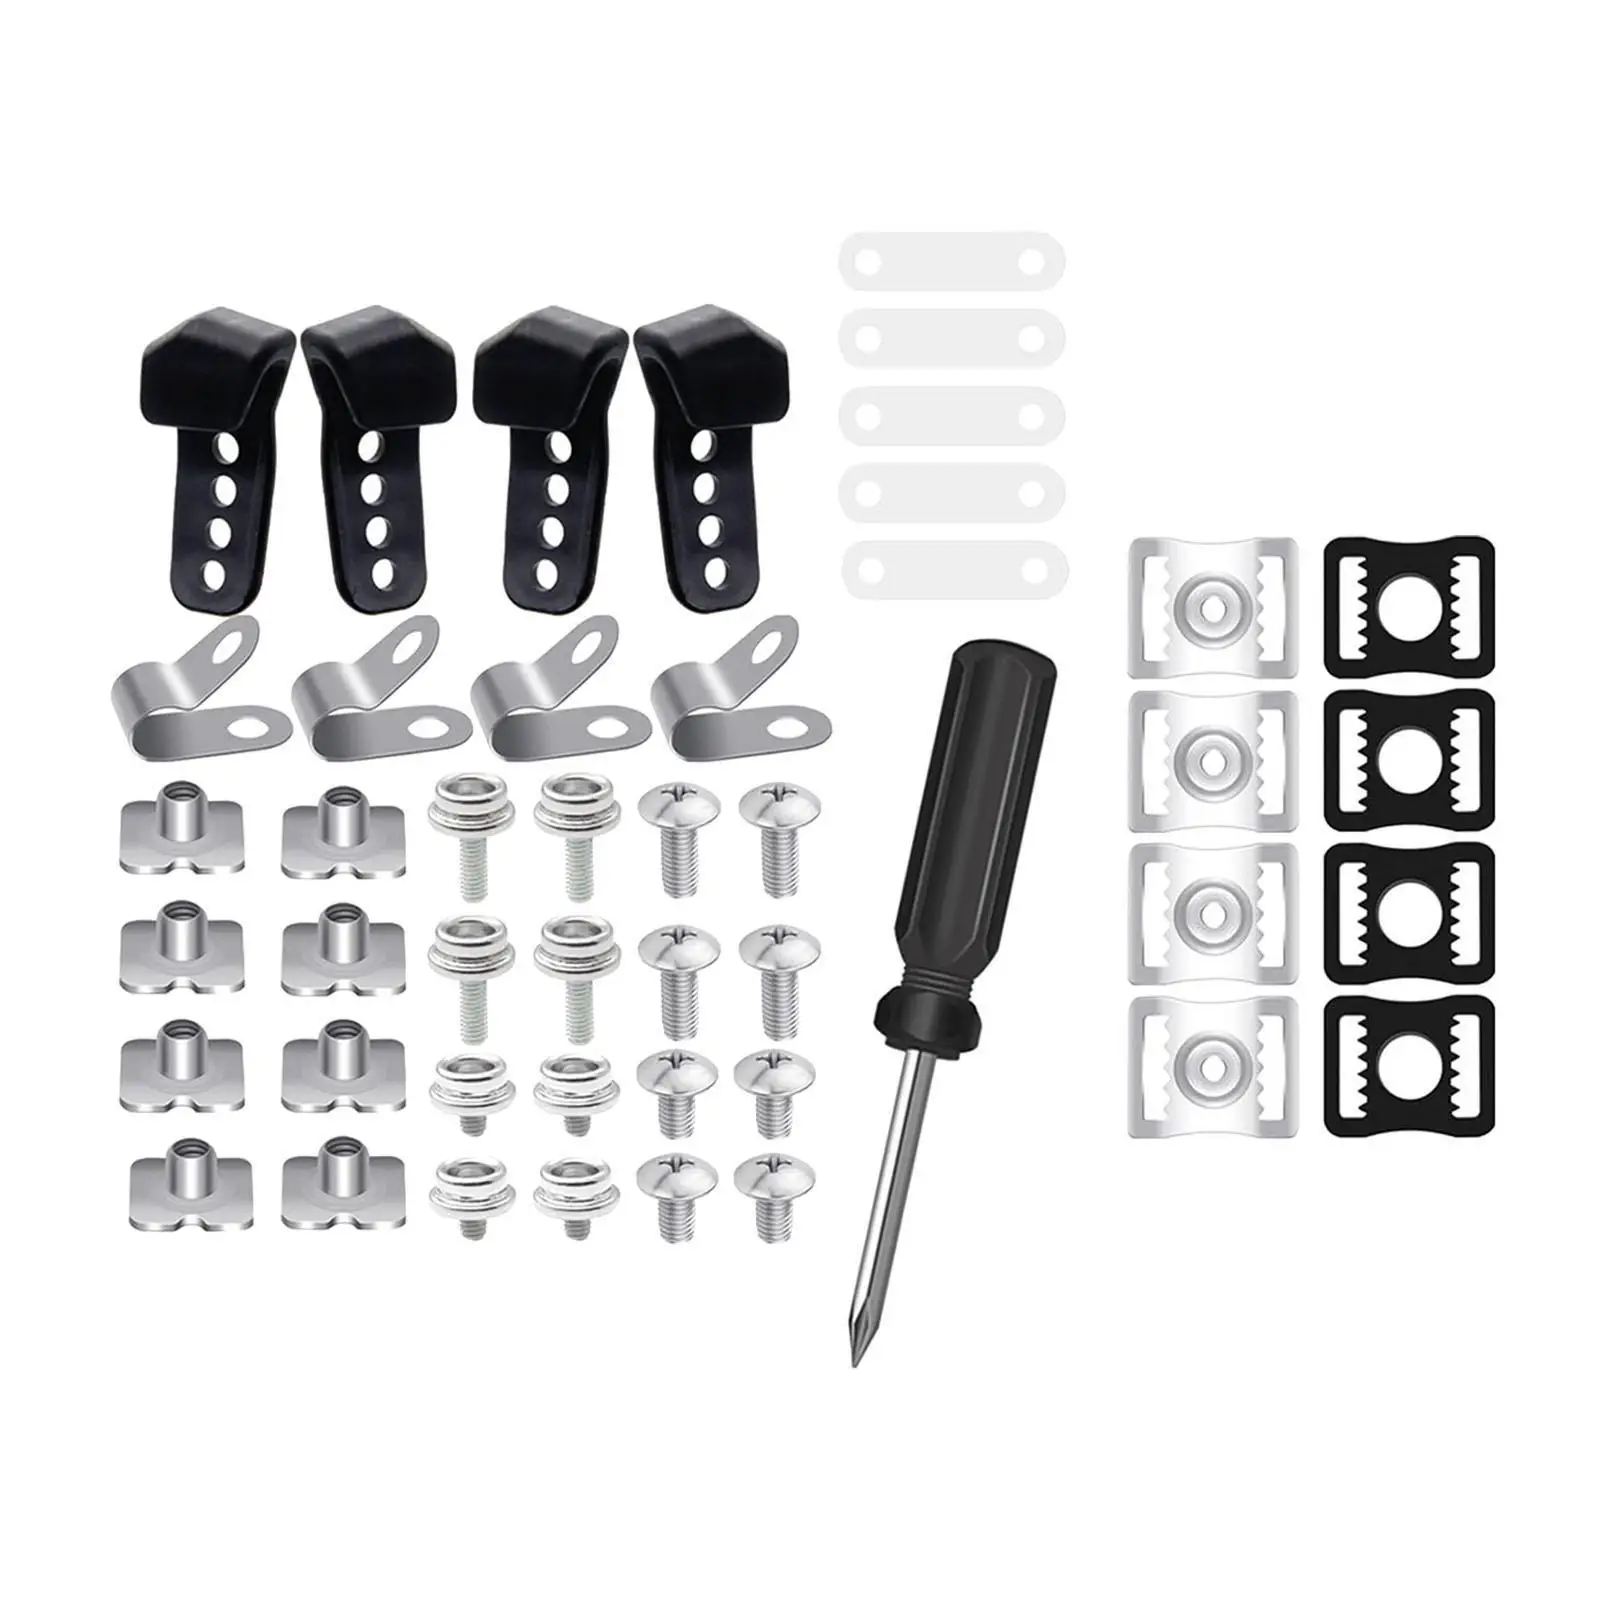 Hockey Visor Hardware Screw Repair Kit Washers Nuts Replacement Durable Universal Easy to Replace Fixings Back up Hardwares